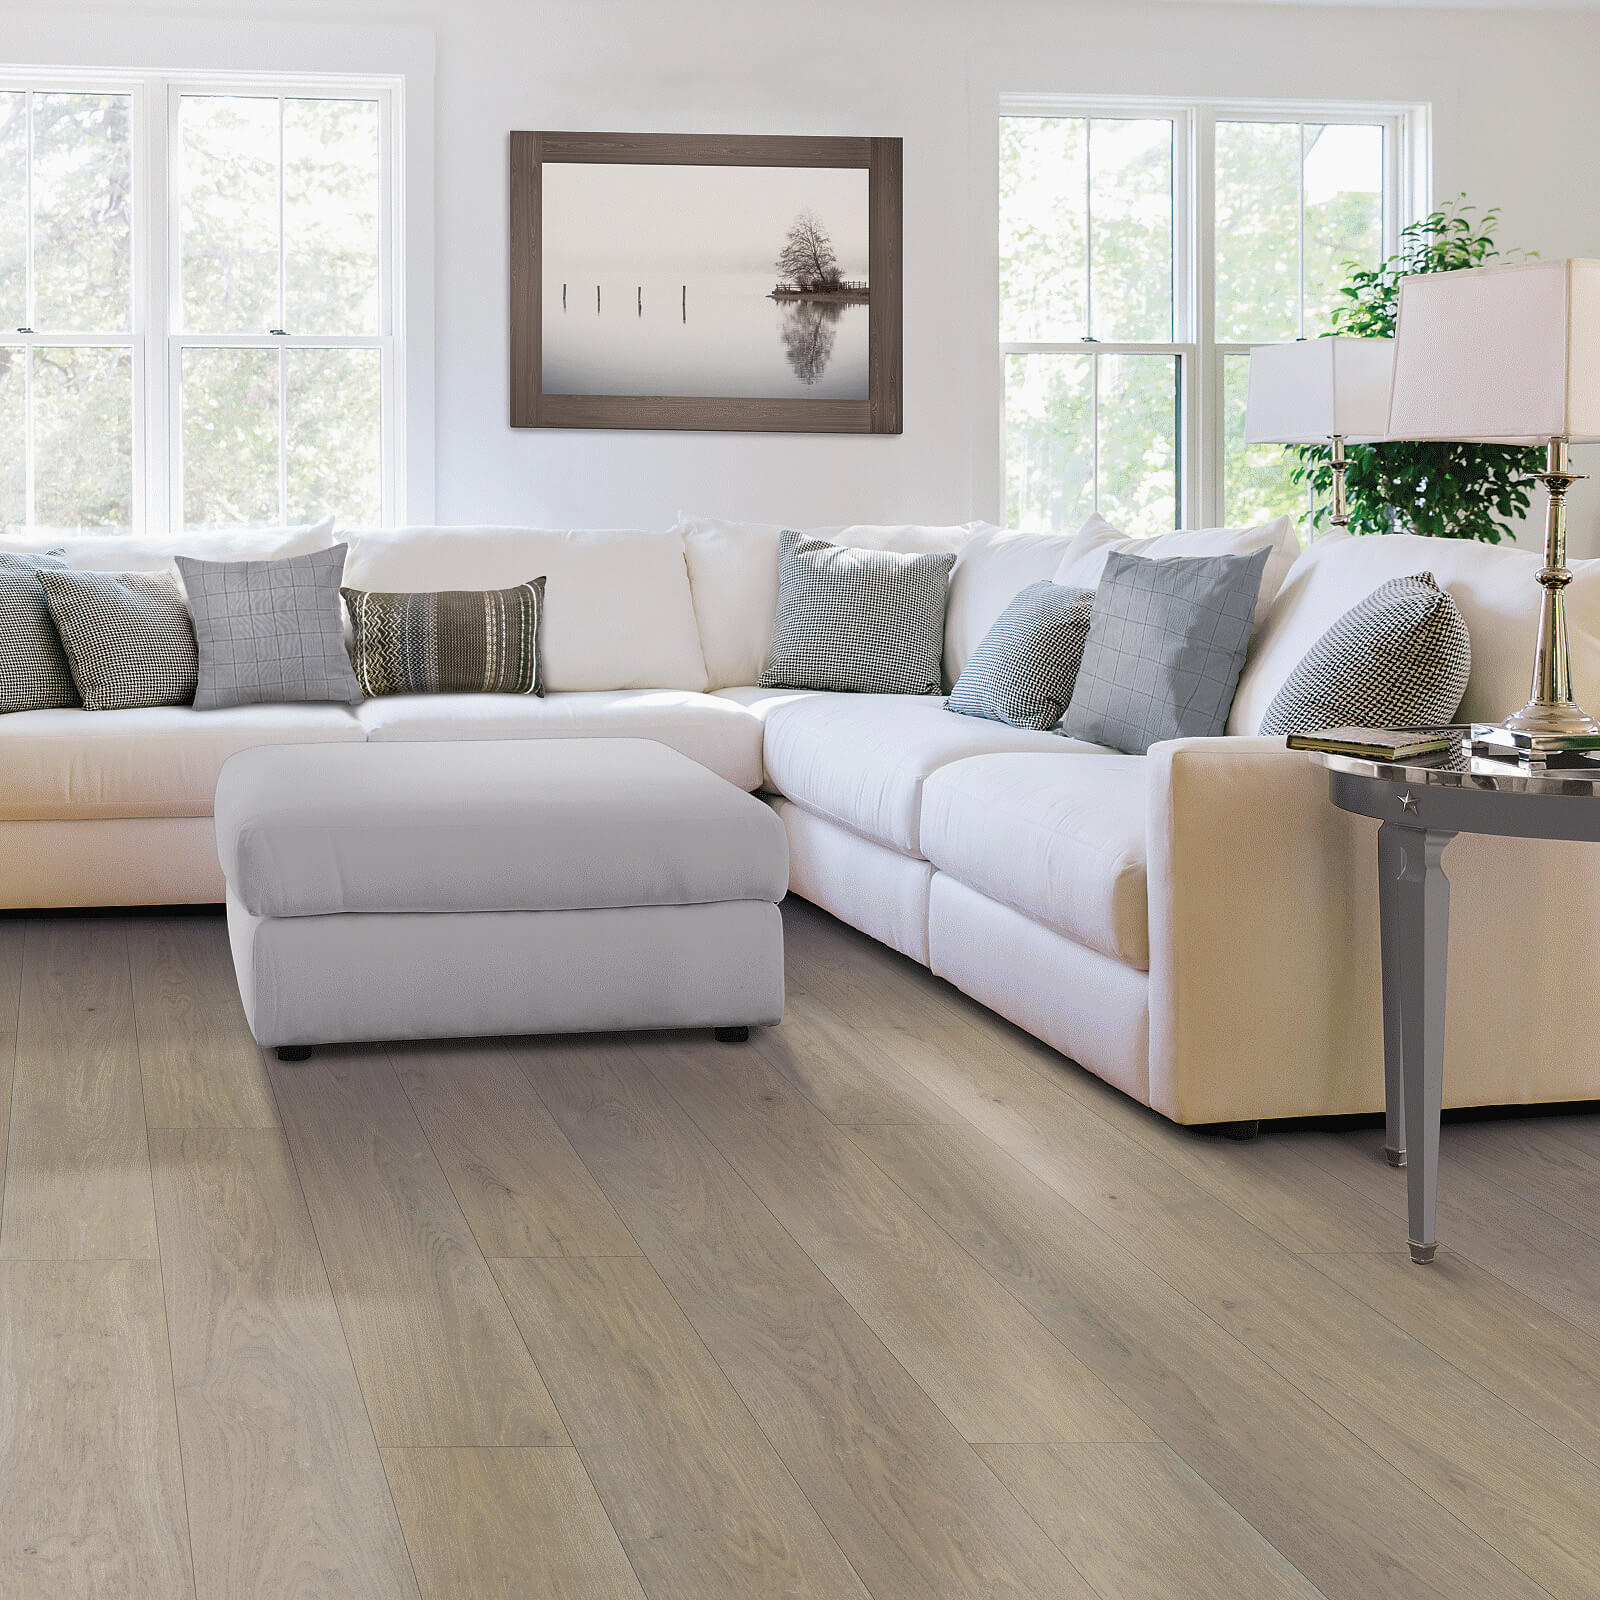 Couch on hardwood | Western States Flooring